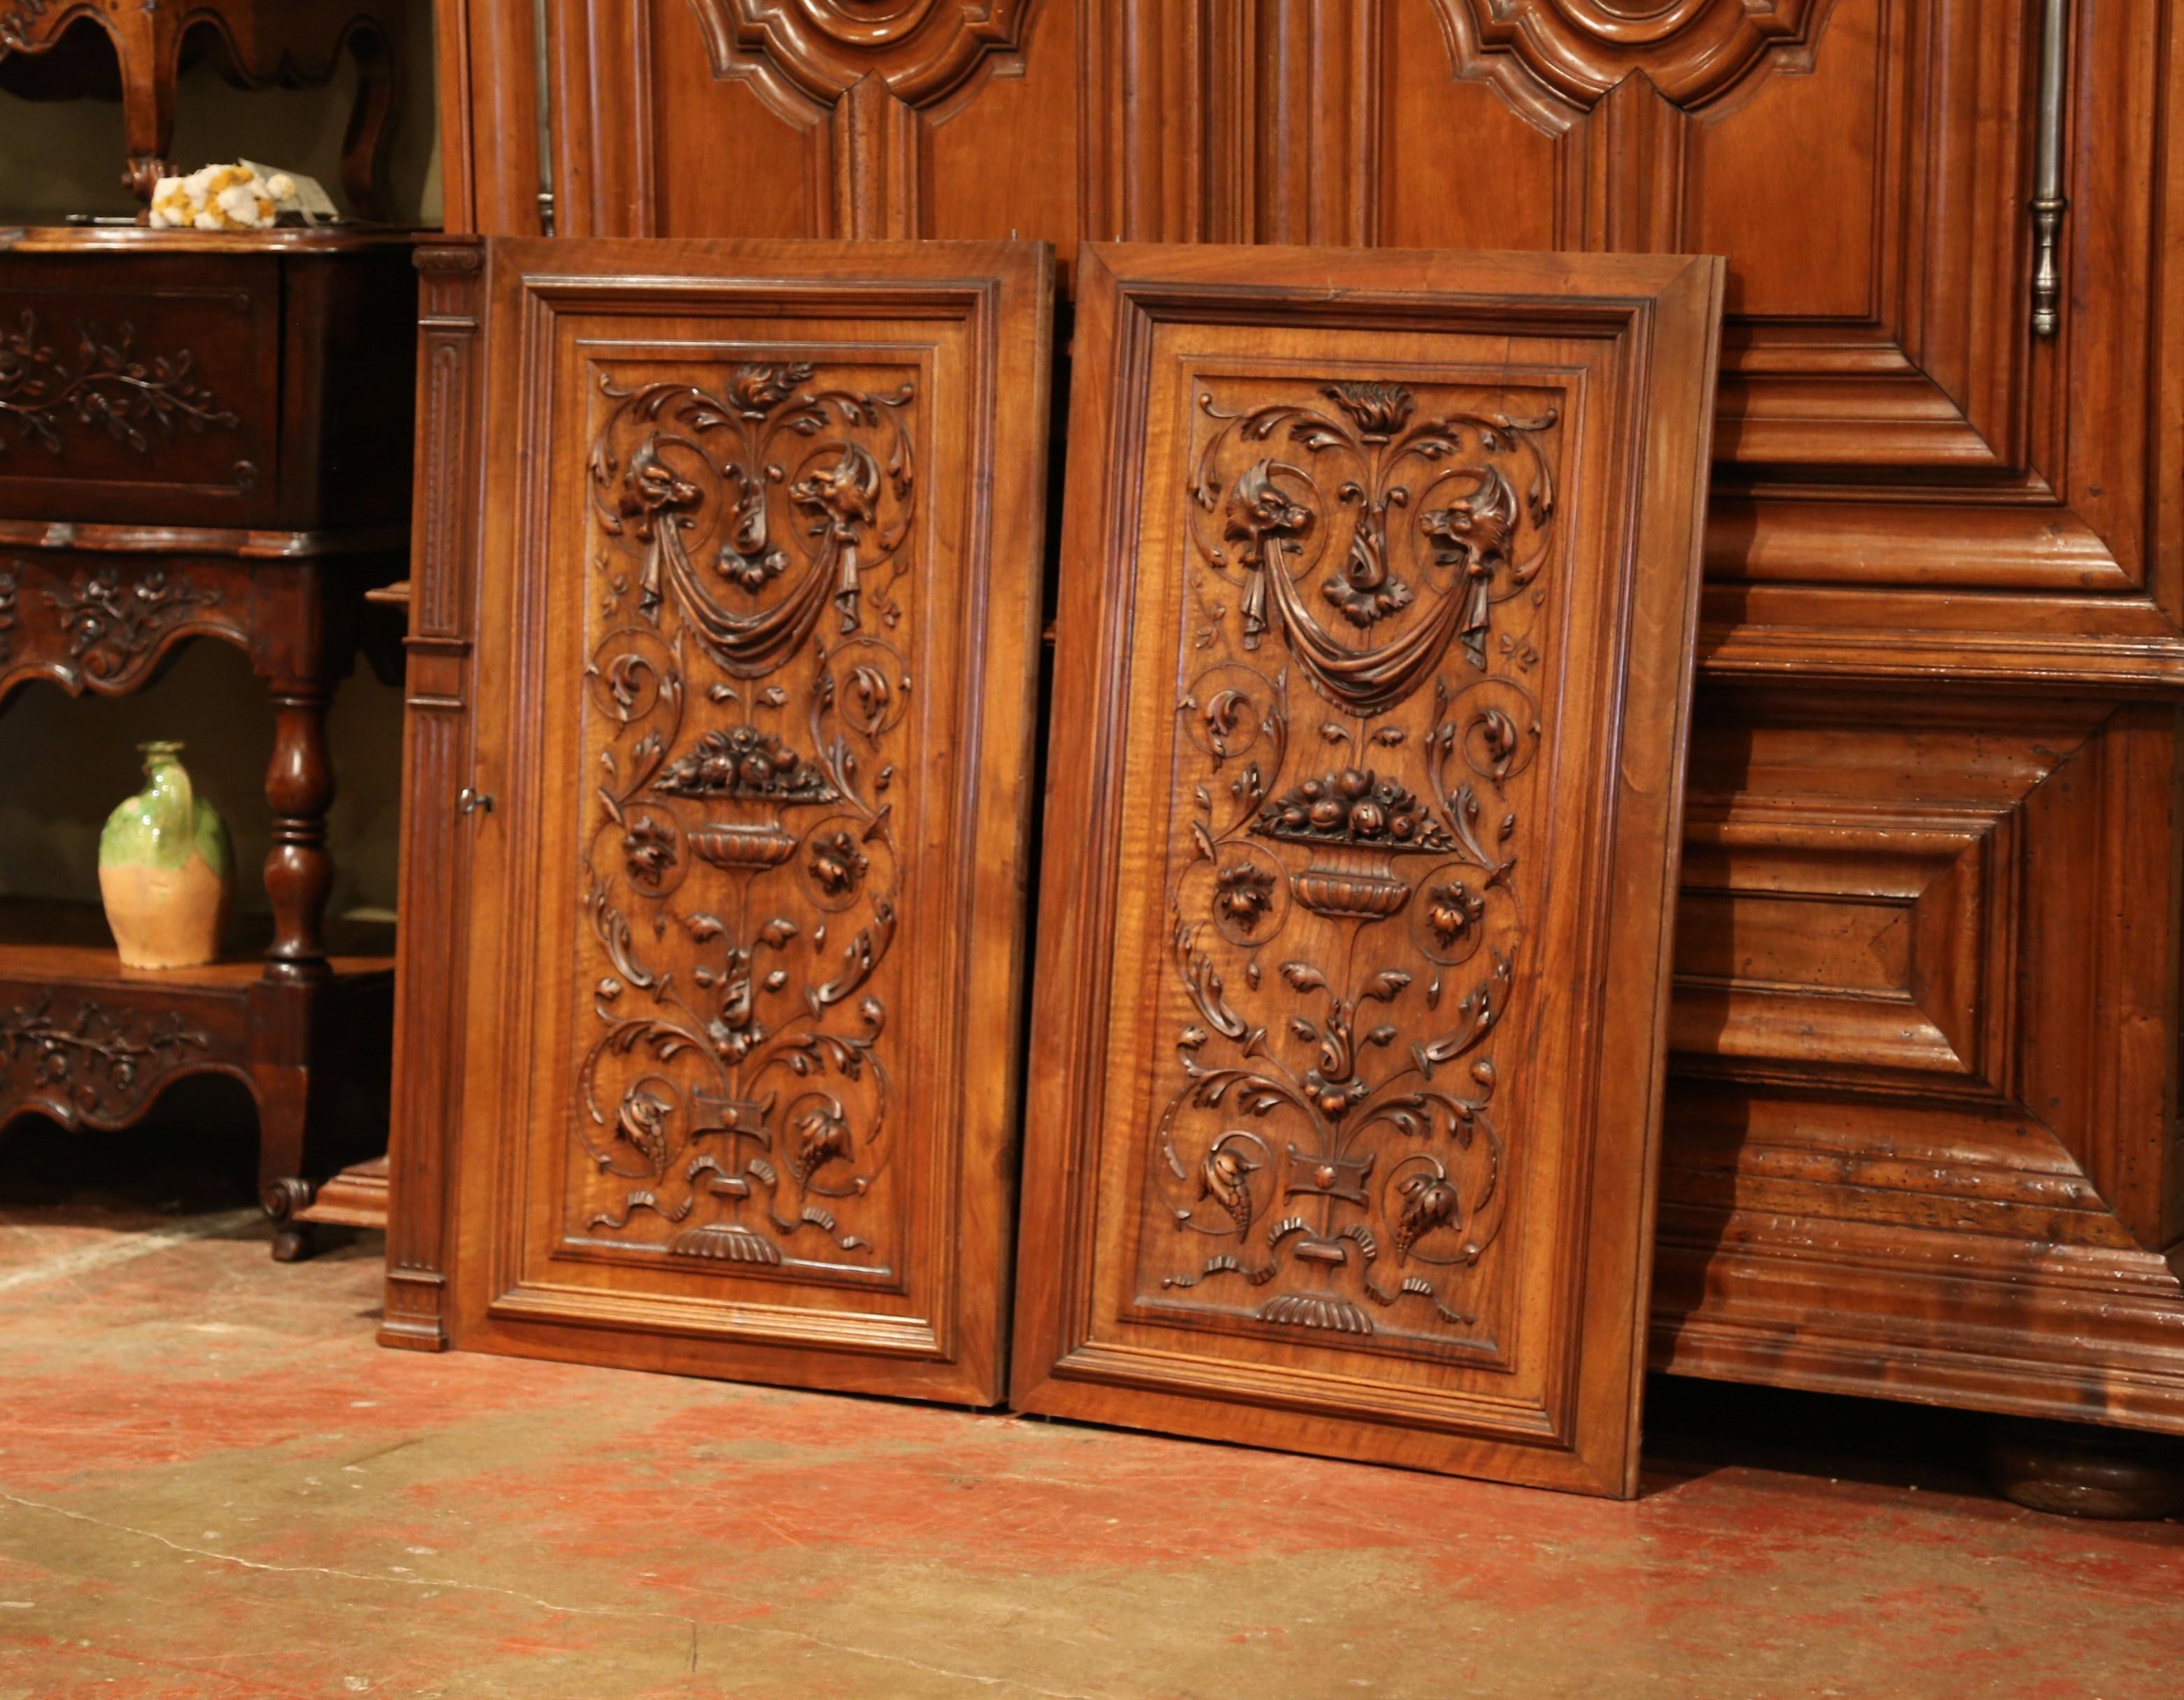 Use these fruit wood doors as closet doors or hang them as decorative art; made in northern France, circa 1870, each antique door has exquisite hand-carved motifs including, dog figures, fruit baskets, floral and foliage decor. These doors are in